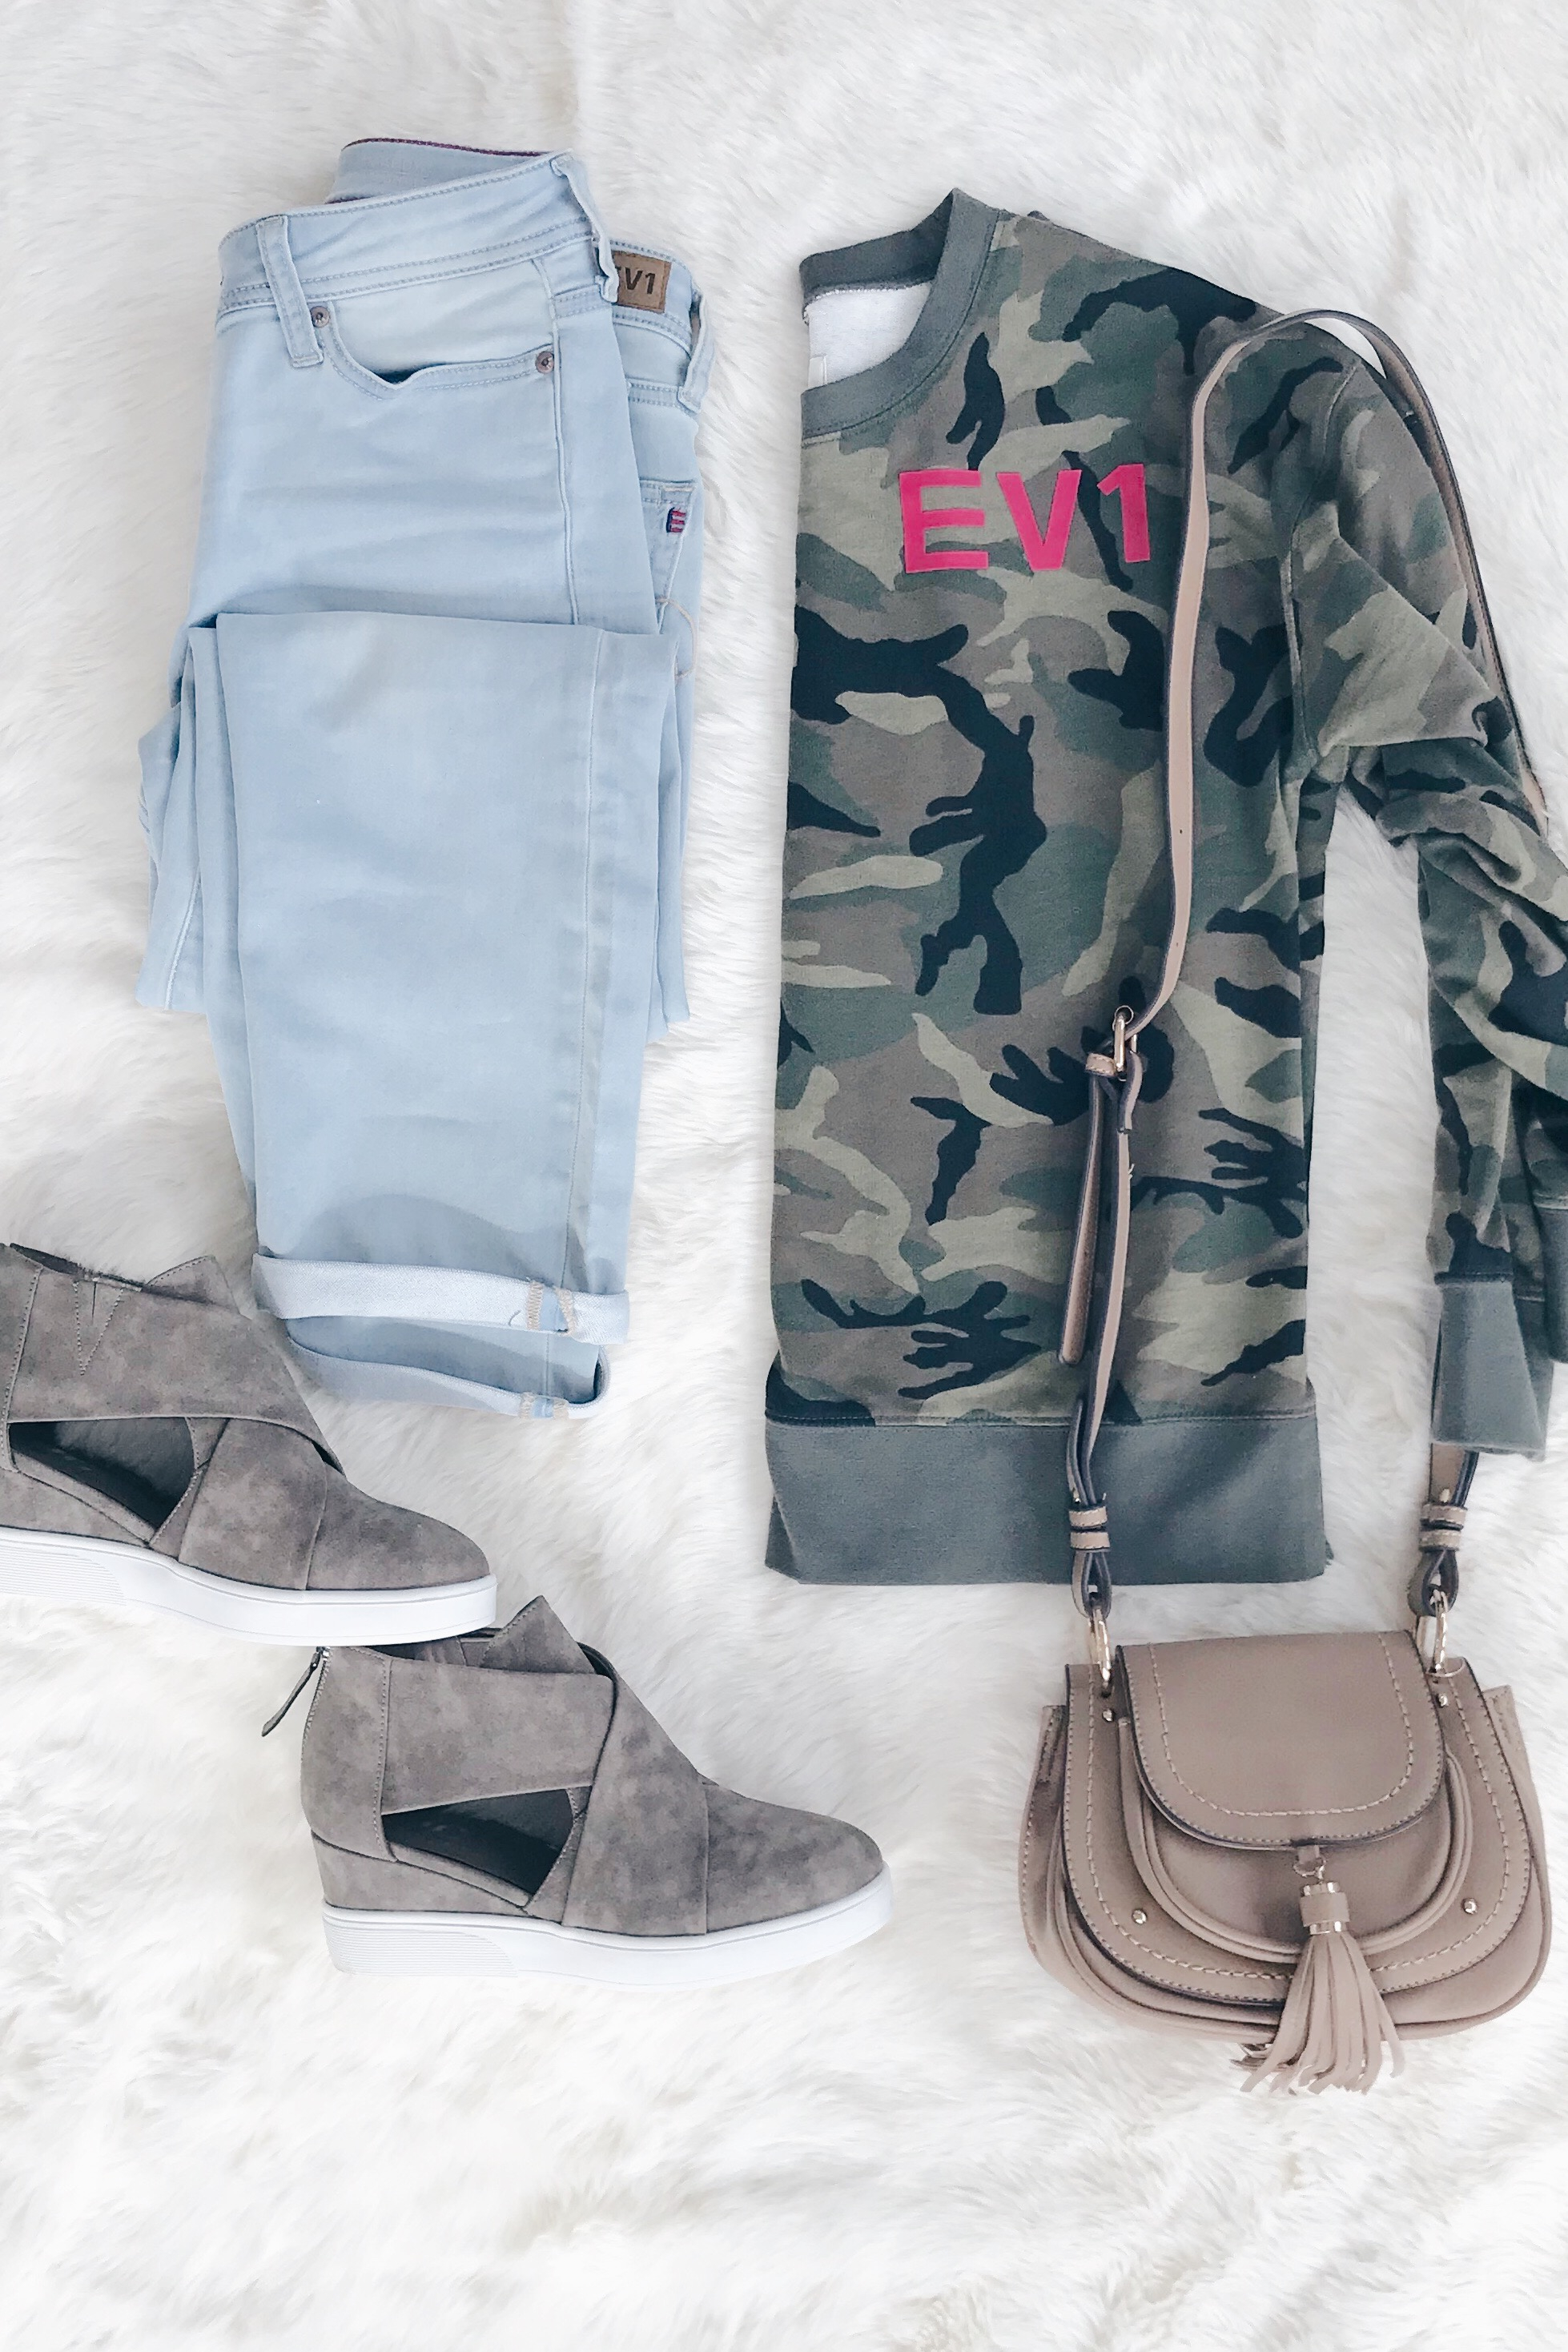 Styling Camo for Spring | New England Style Blog